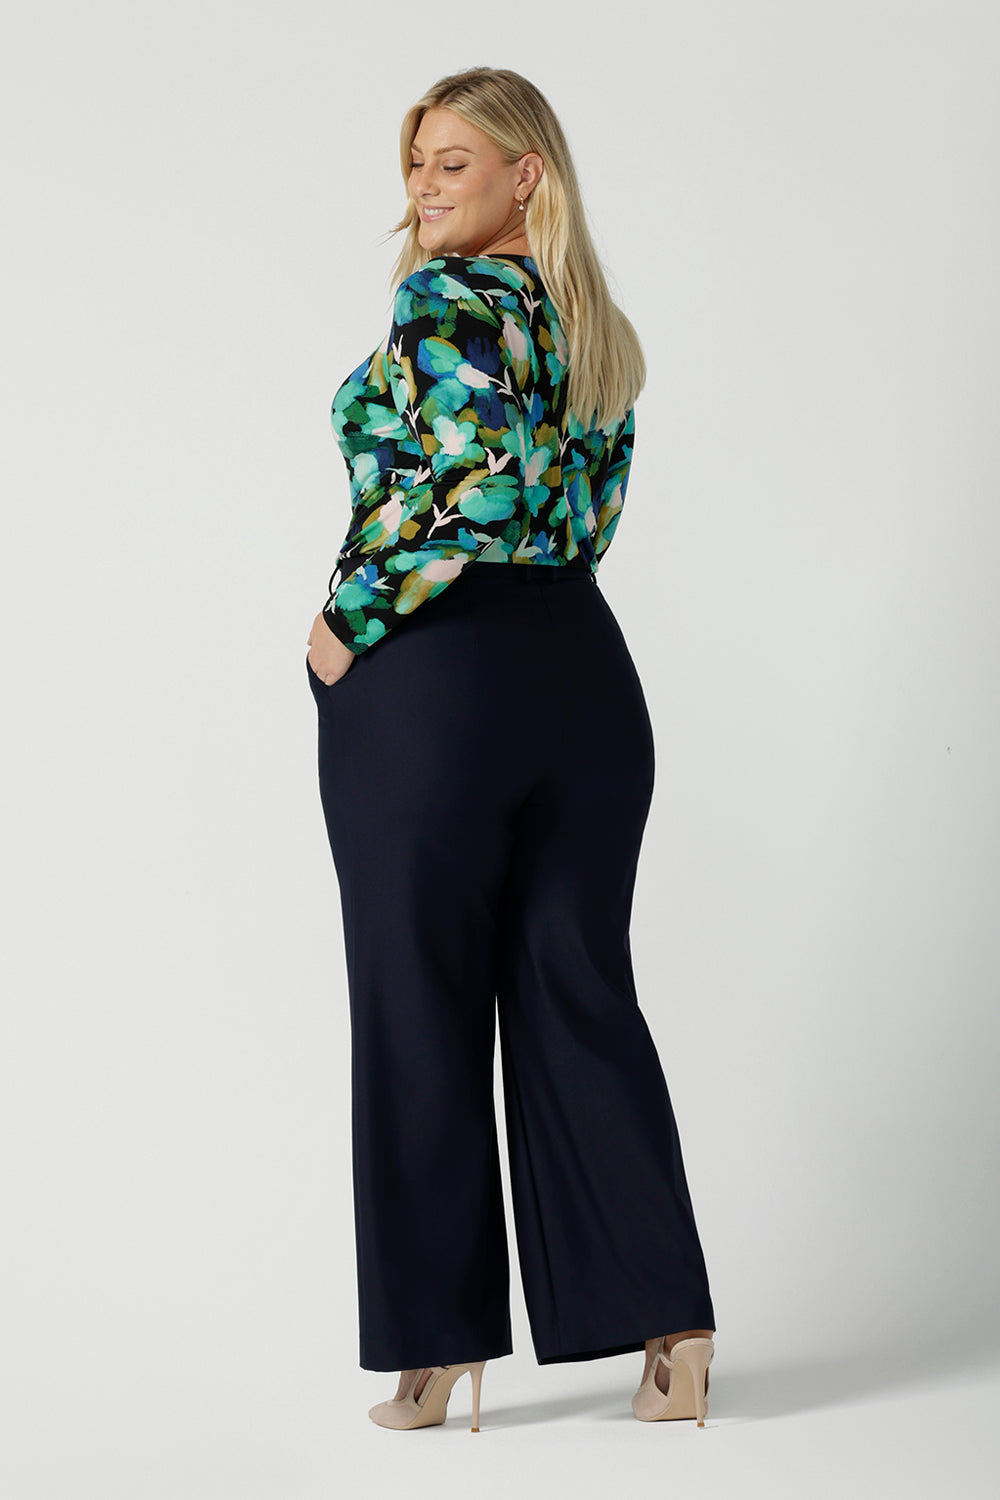 Back view of a size 18 woman wears the Mason top in Canopy, a green watercolour print top with a green watercolour splatter print. Styled back with Kade pant in navy. Made in Australia for women size 8 - 24.